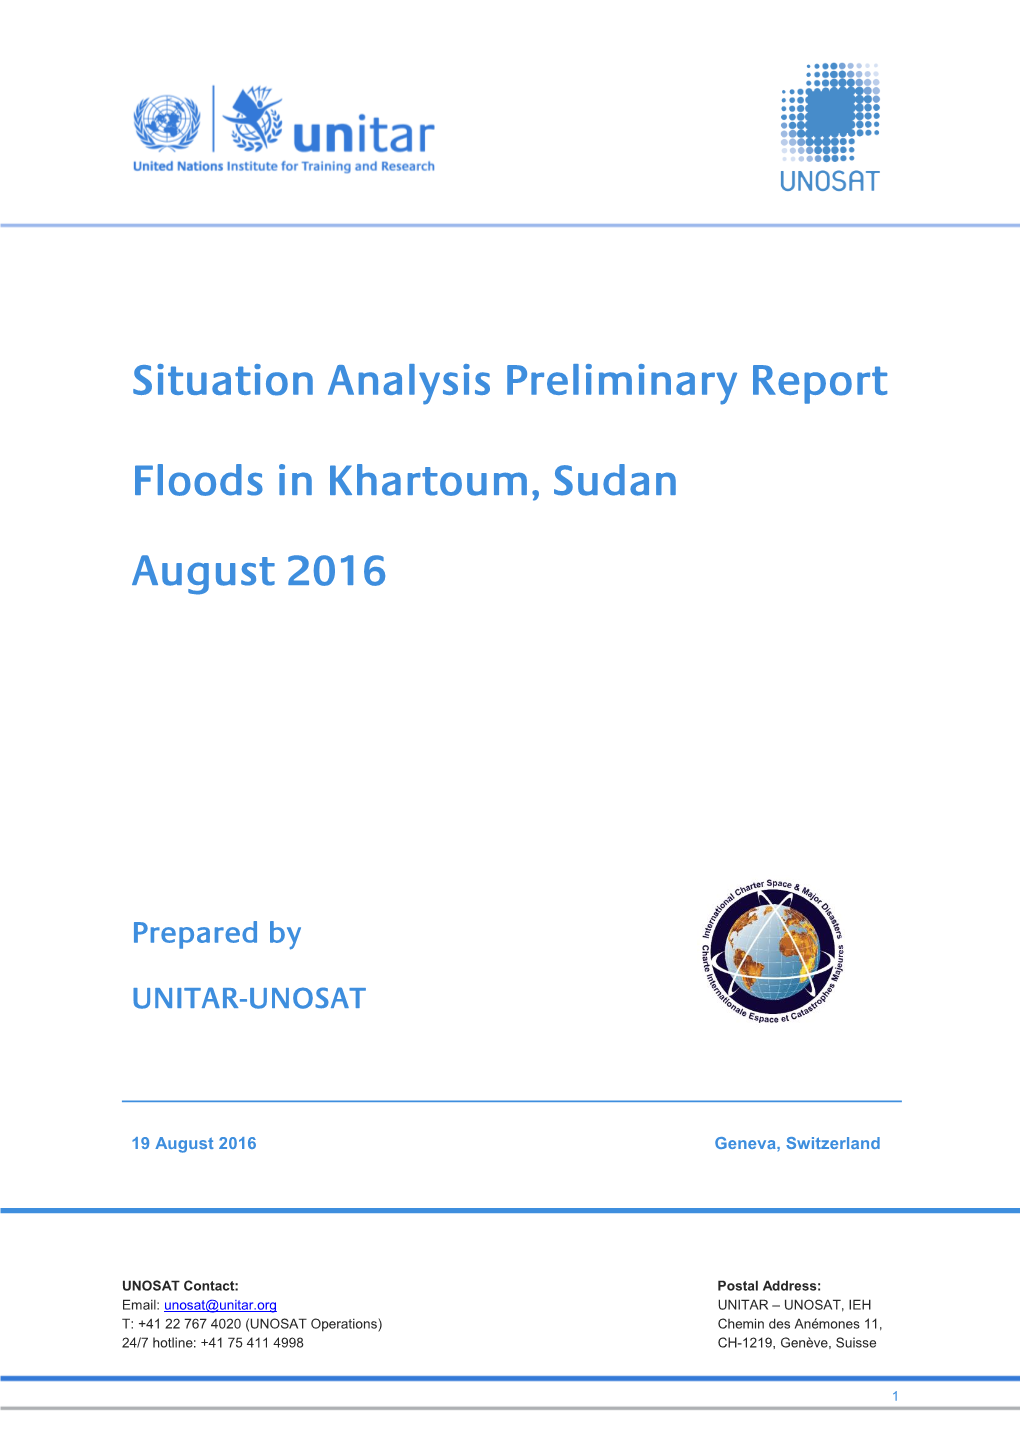 Situation Analysis Preliminary Report Floods in Khartoum, Sudan August